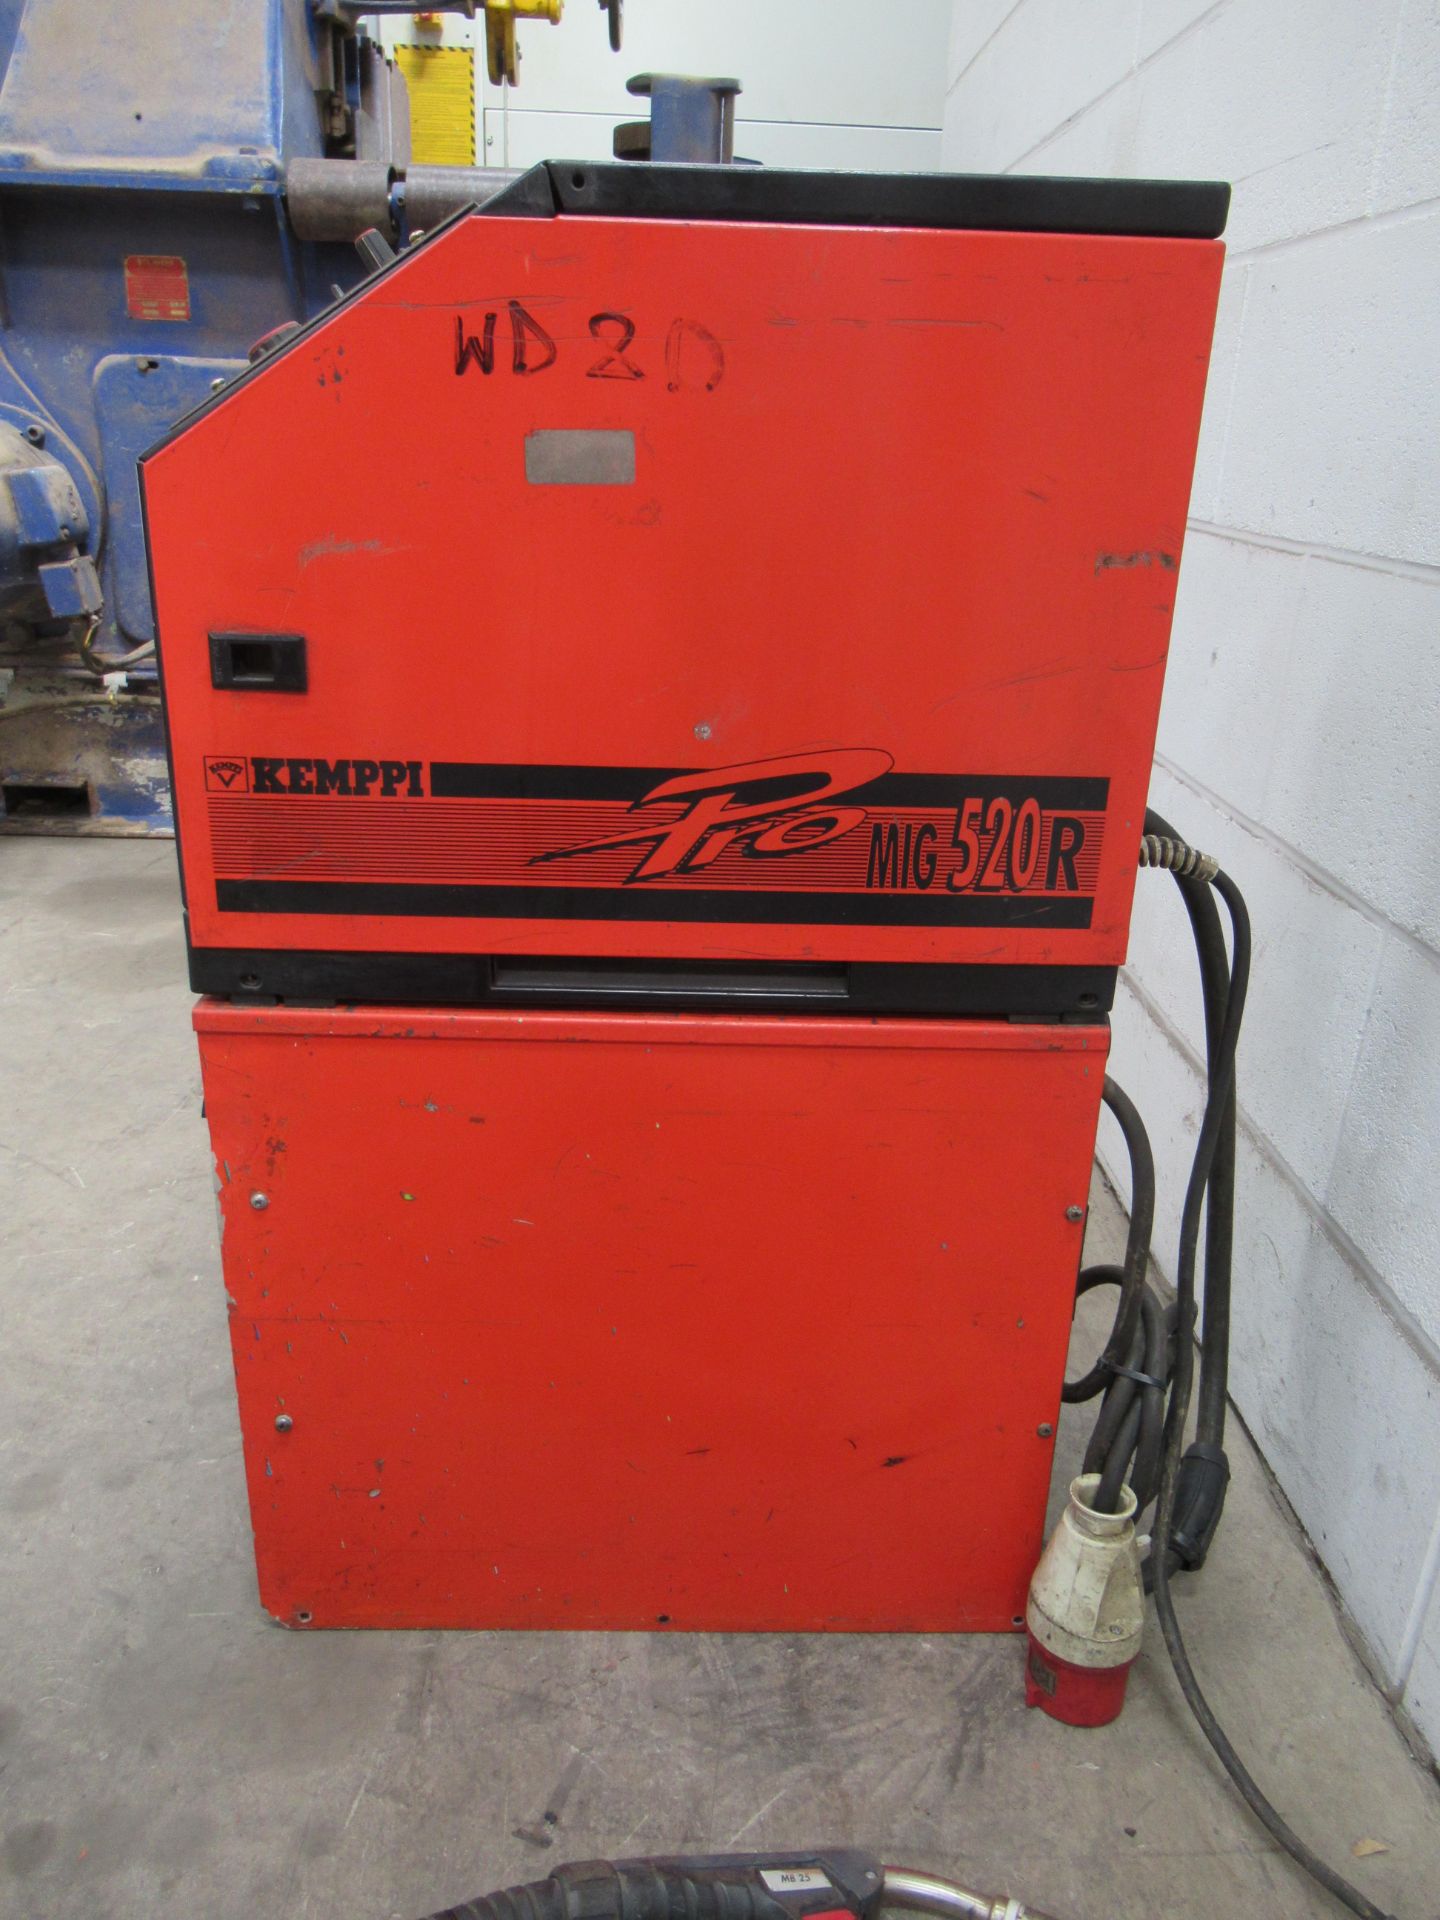 Kemppi MC Promig 520R welder with Kemppi Pro 3000 power source with torch - Image 3 of 8